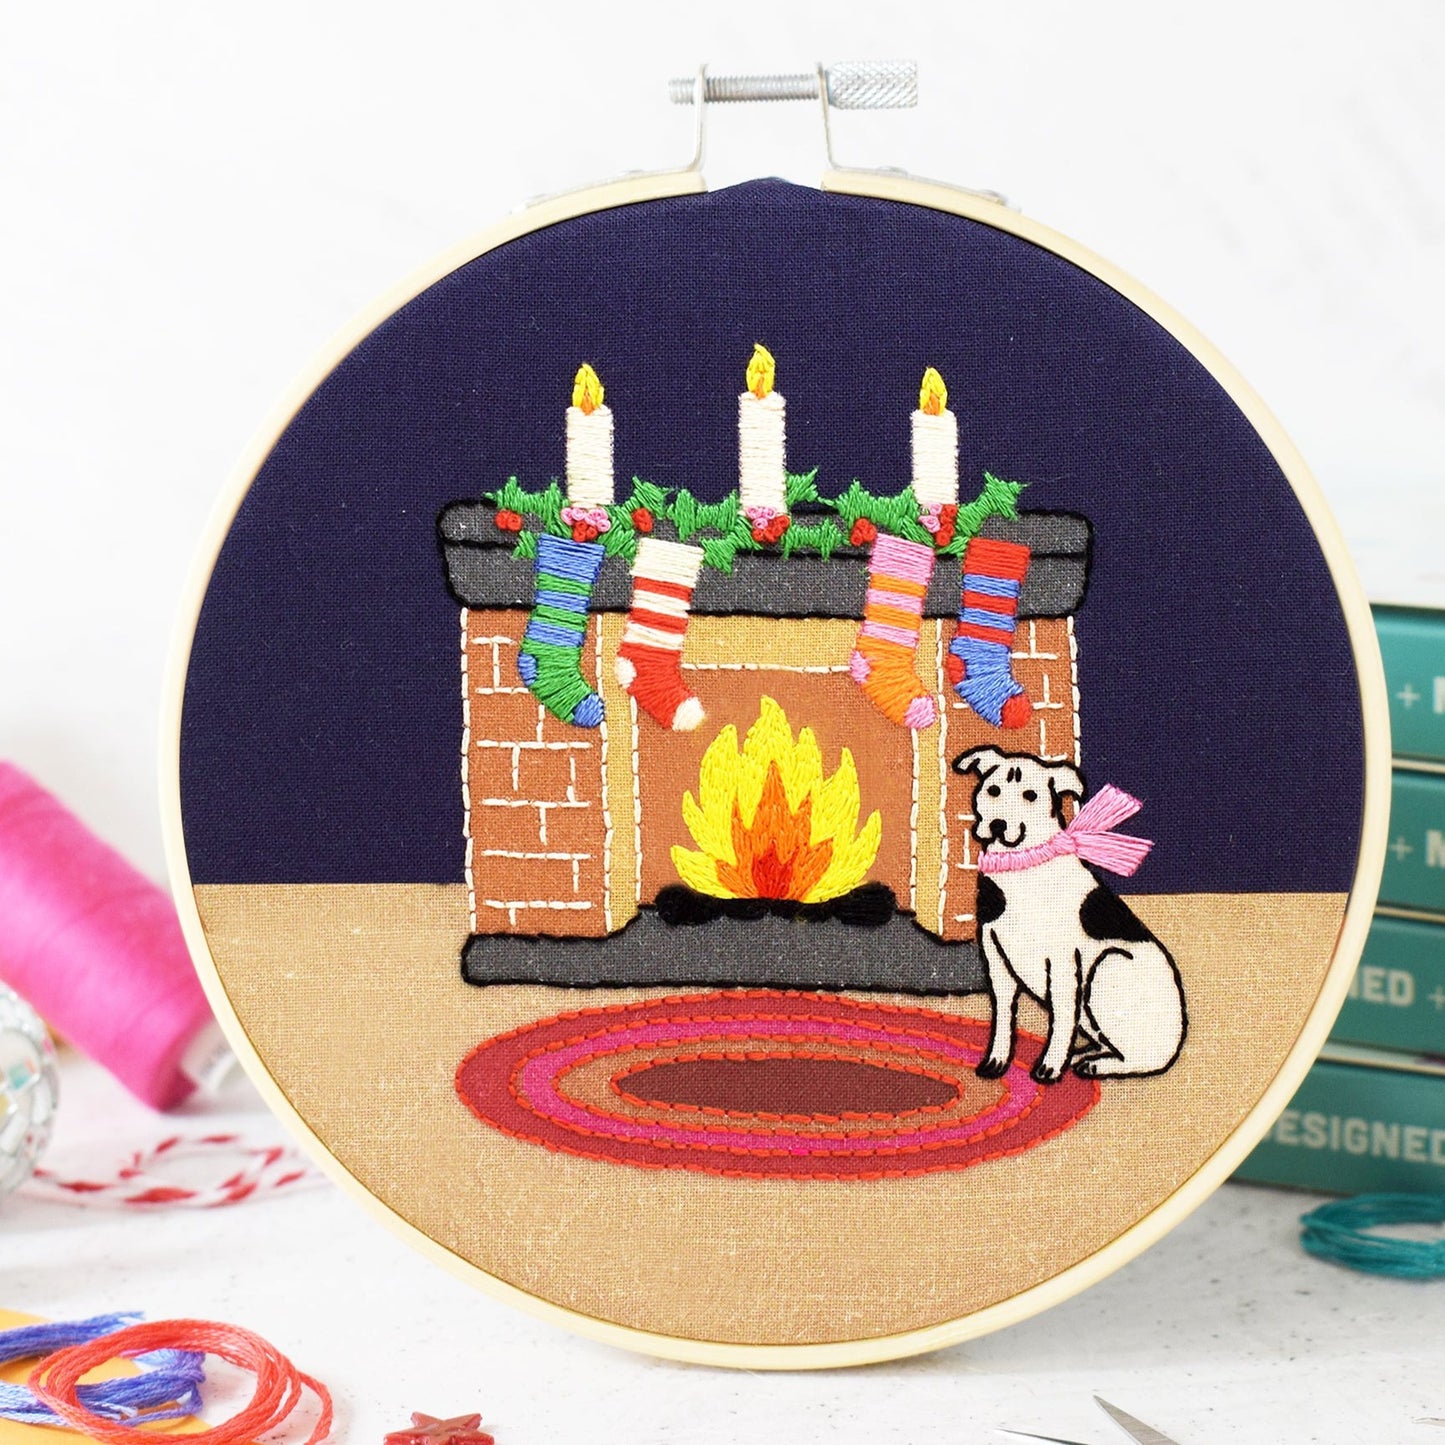 'Fireplace' Large Embroidery Kit